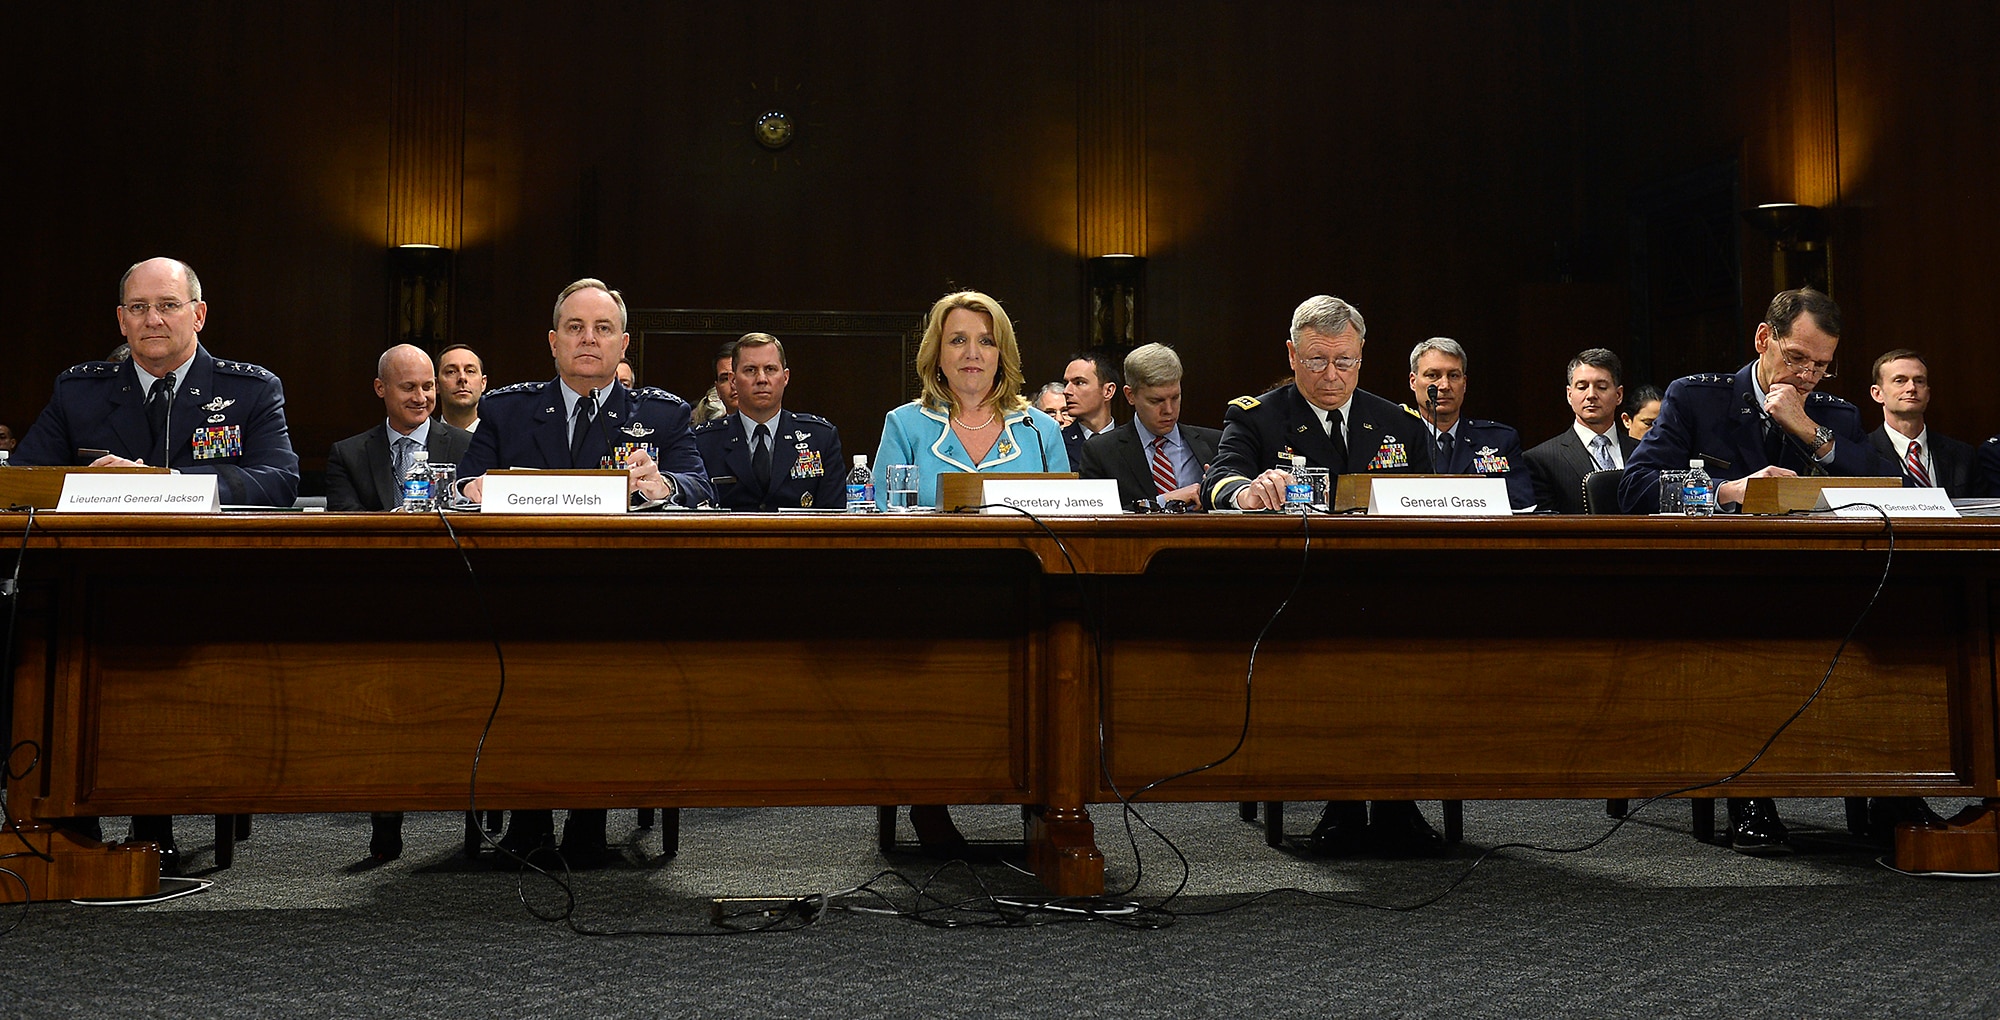 Secretary of the Air Force Deborah Lee James and Air Force Chief of Staff Gen. Mark A. Welsh III testify on the Air Force posture for fiscal year 2015 before the Senate Appropriations Committee on Defense, April 2, 2014, in Washington, D.C.  Also testifying were, from the left, Gen. James "JJ" Jackson, the Air Force Reserve chief; Gen. Frank J. Grass, the National Guard bureau chief; and Lt. Gen. Stanley E. Clarke III, the Air National Guard director.  (U.S. Air Force photo/Scott M. Ash)